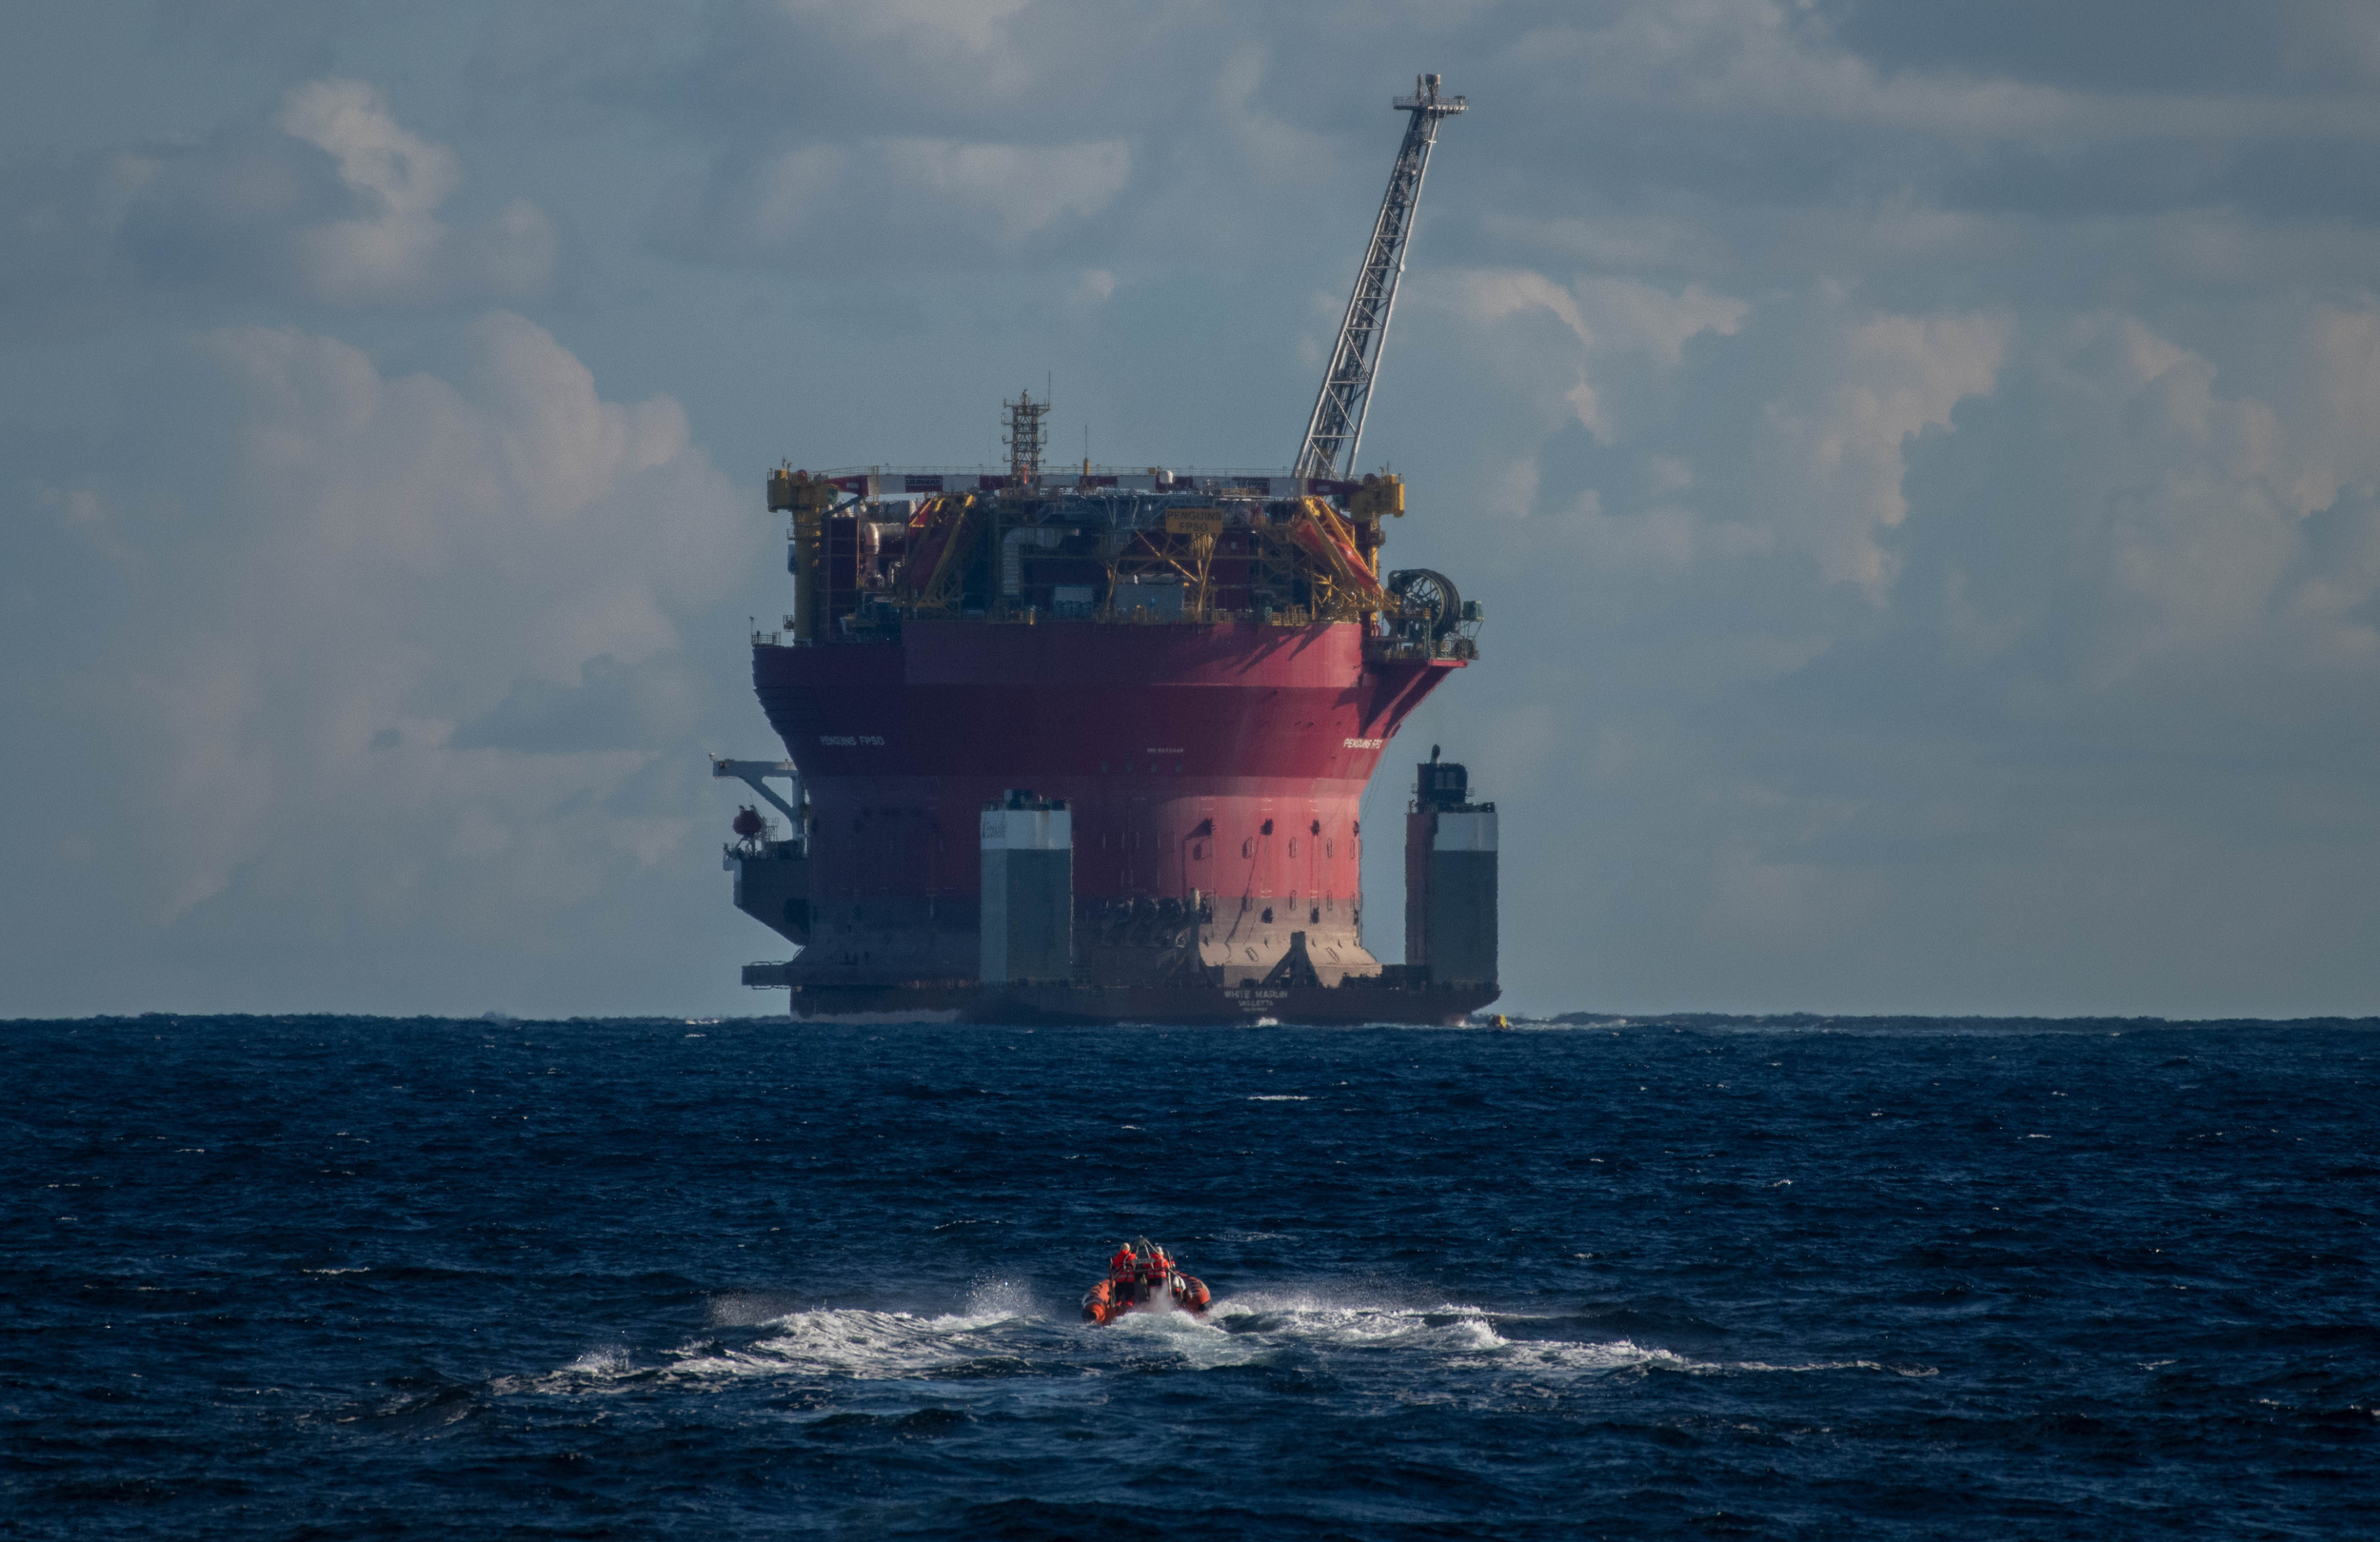 A small boat approaches a giant oil platform in open ocean. The red platform is mounted on a ship, and it looms against the horizon.